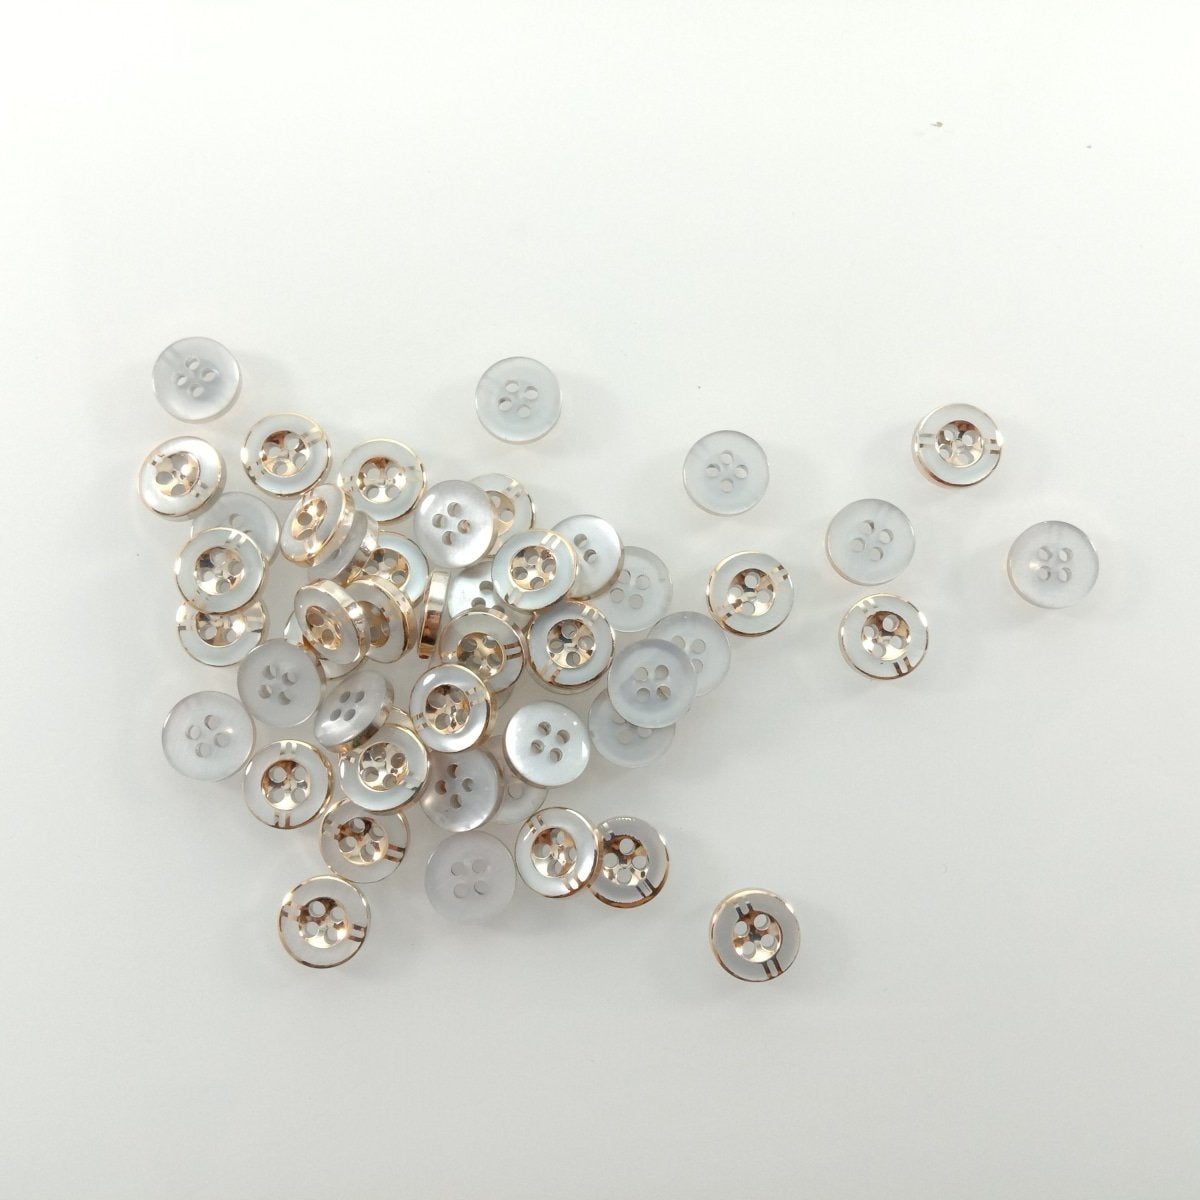 50Pcs 11Mm 4 Holes Resin Buttons Shirt Apparel Sewing Accessories Diy Crafts Clothing